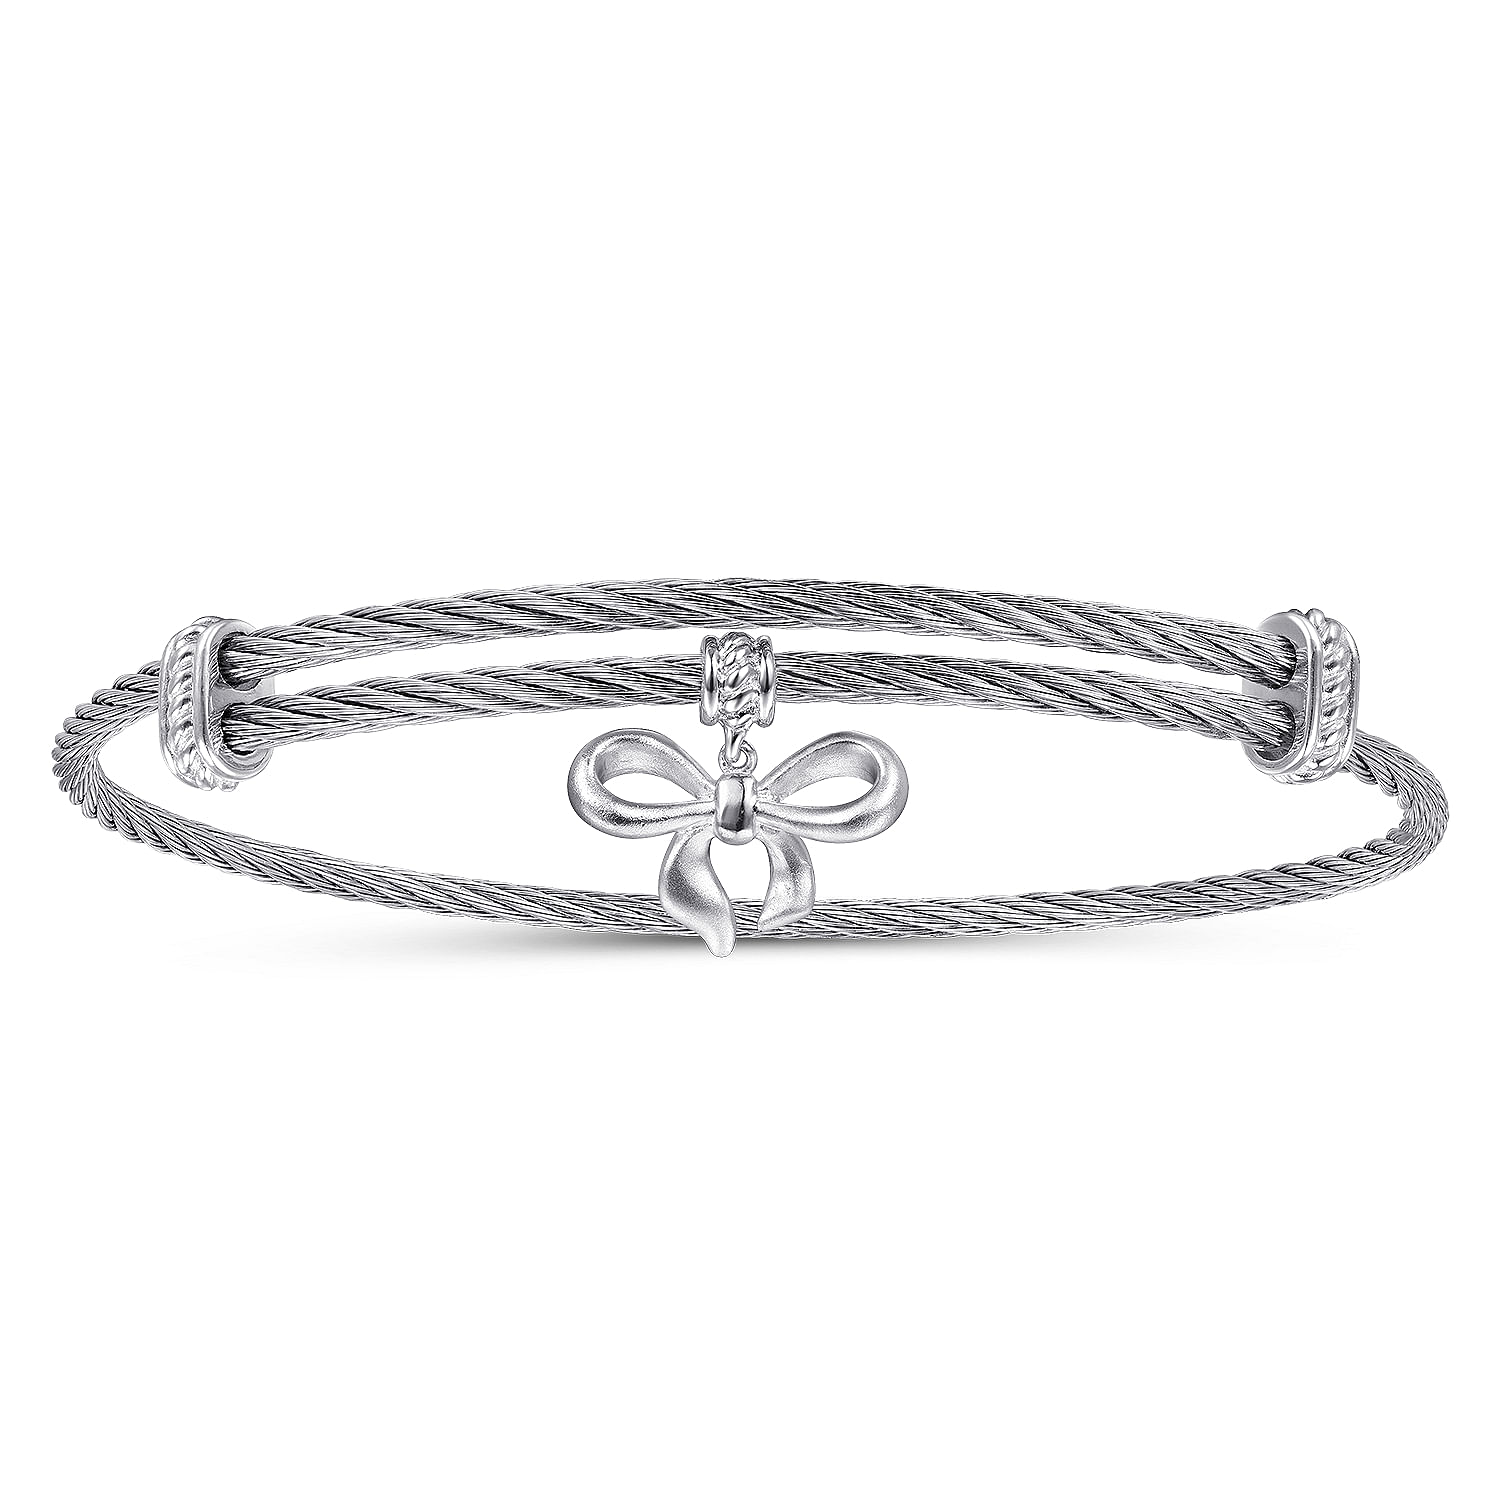 Adjustable Twisted Cable Stainless Steel Bangle with Sterling Silver Bow Charm